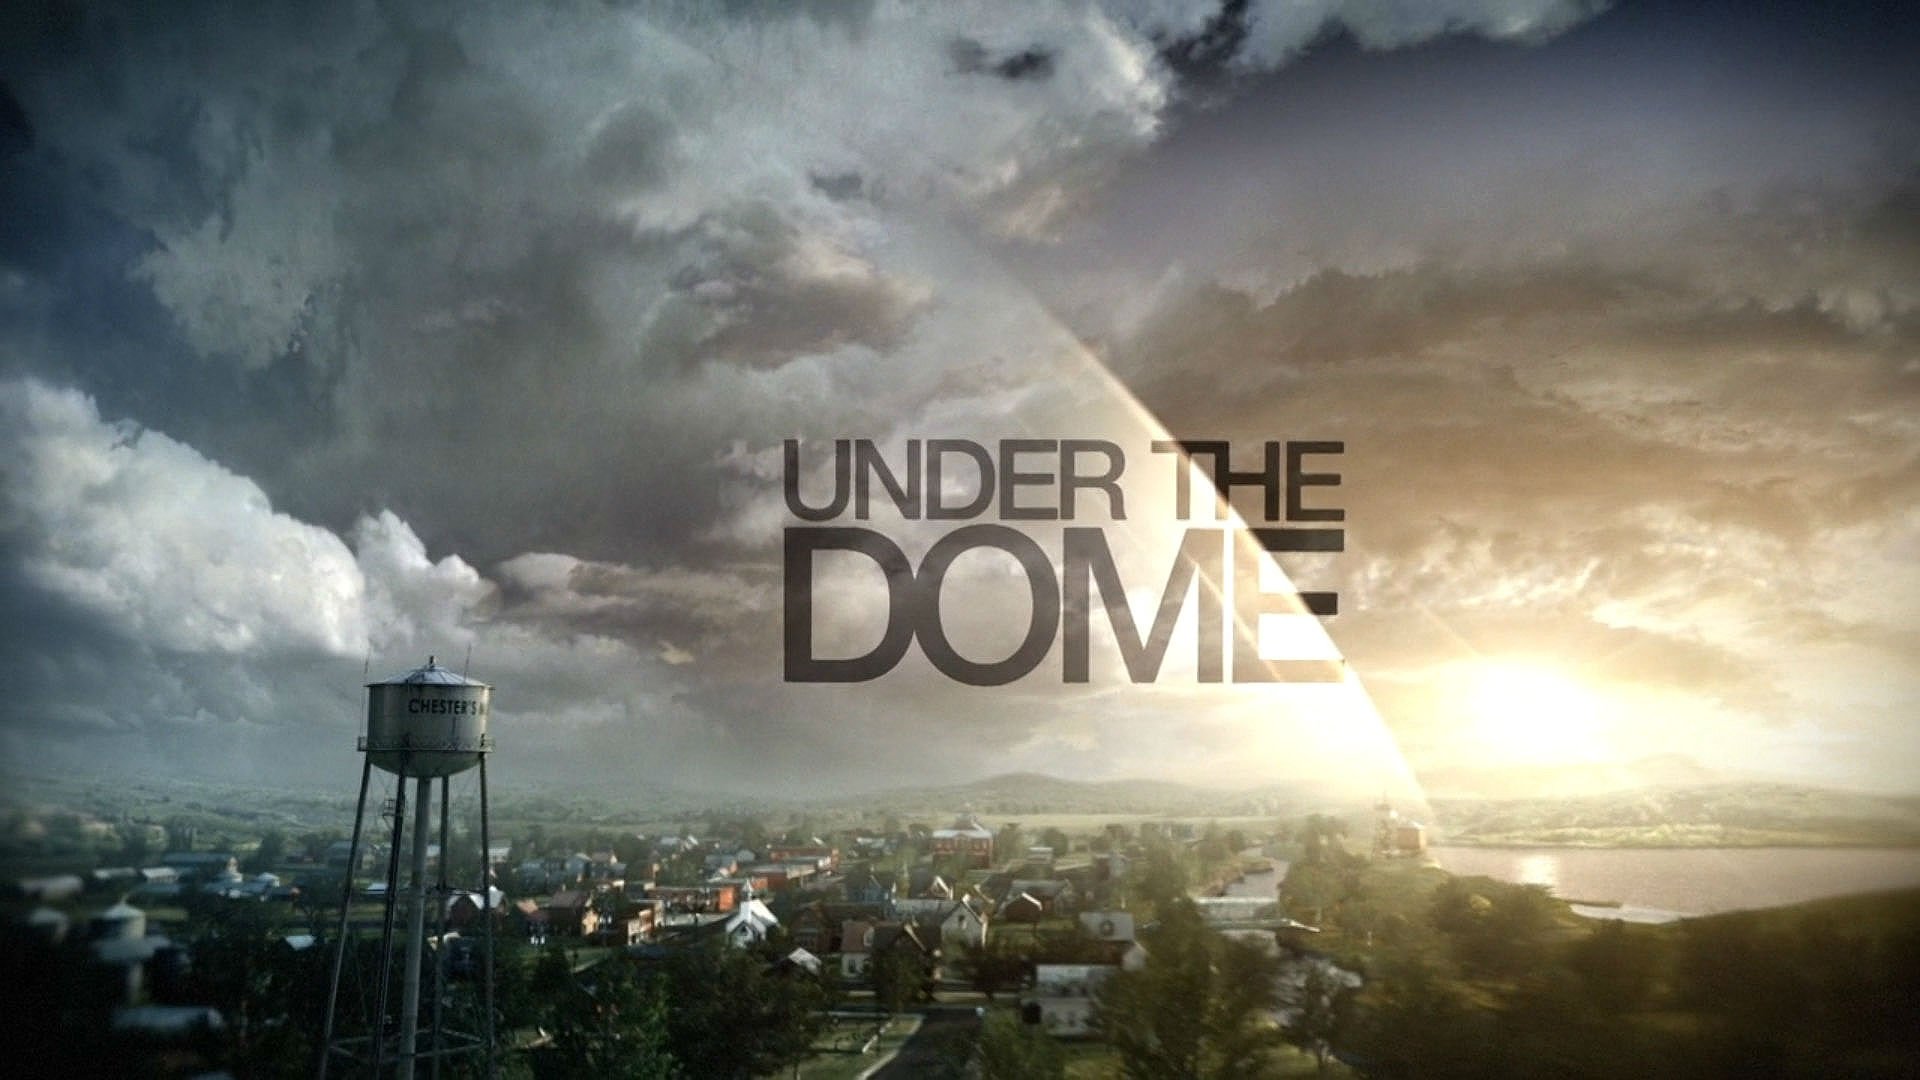 under, The, Dome, Drama, Mystery, Thriller, Sci fi, Series, Horror,  28 Wallpaper